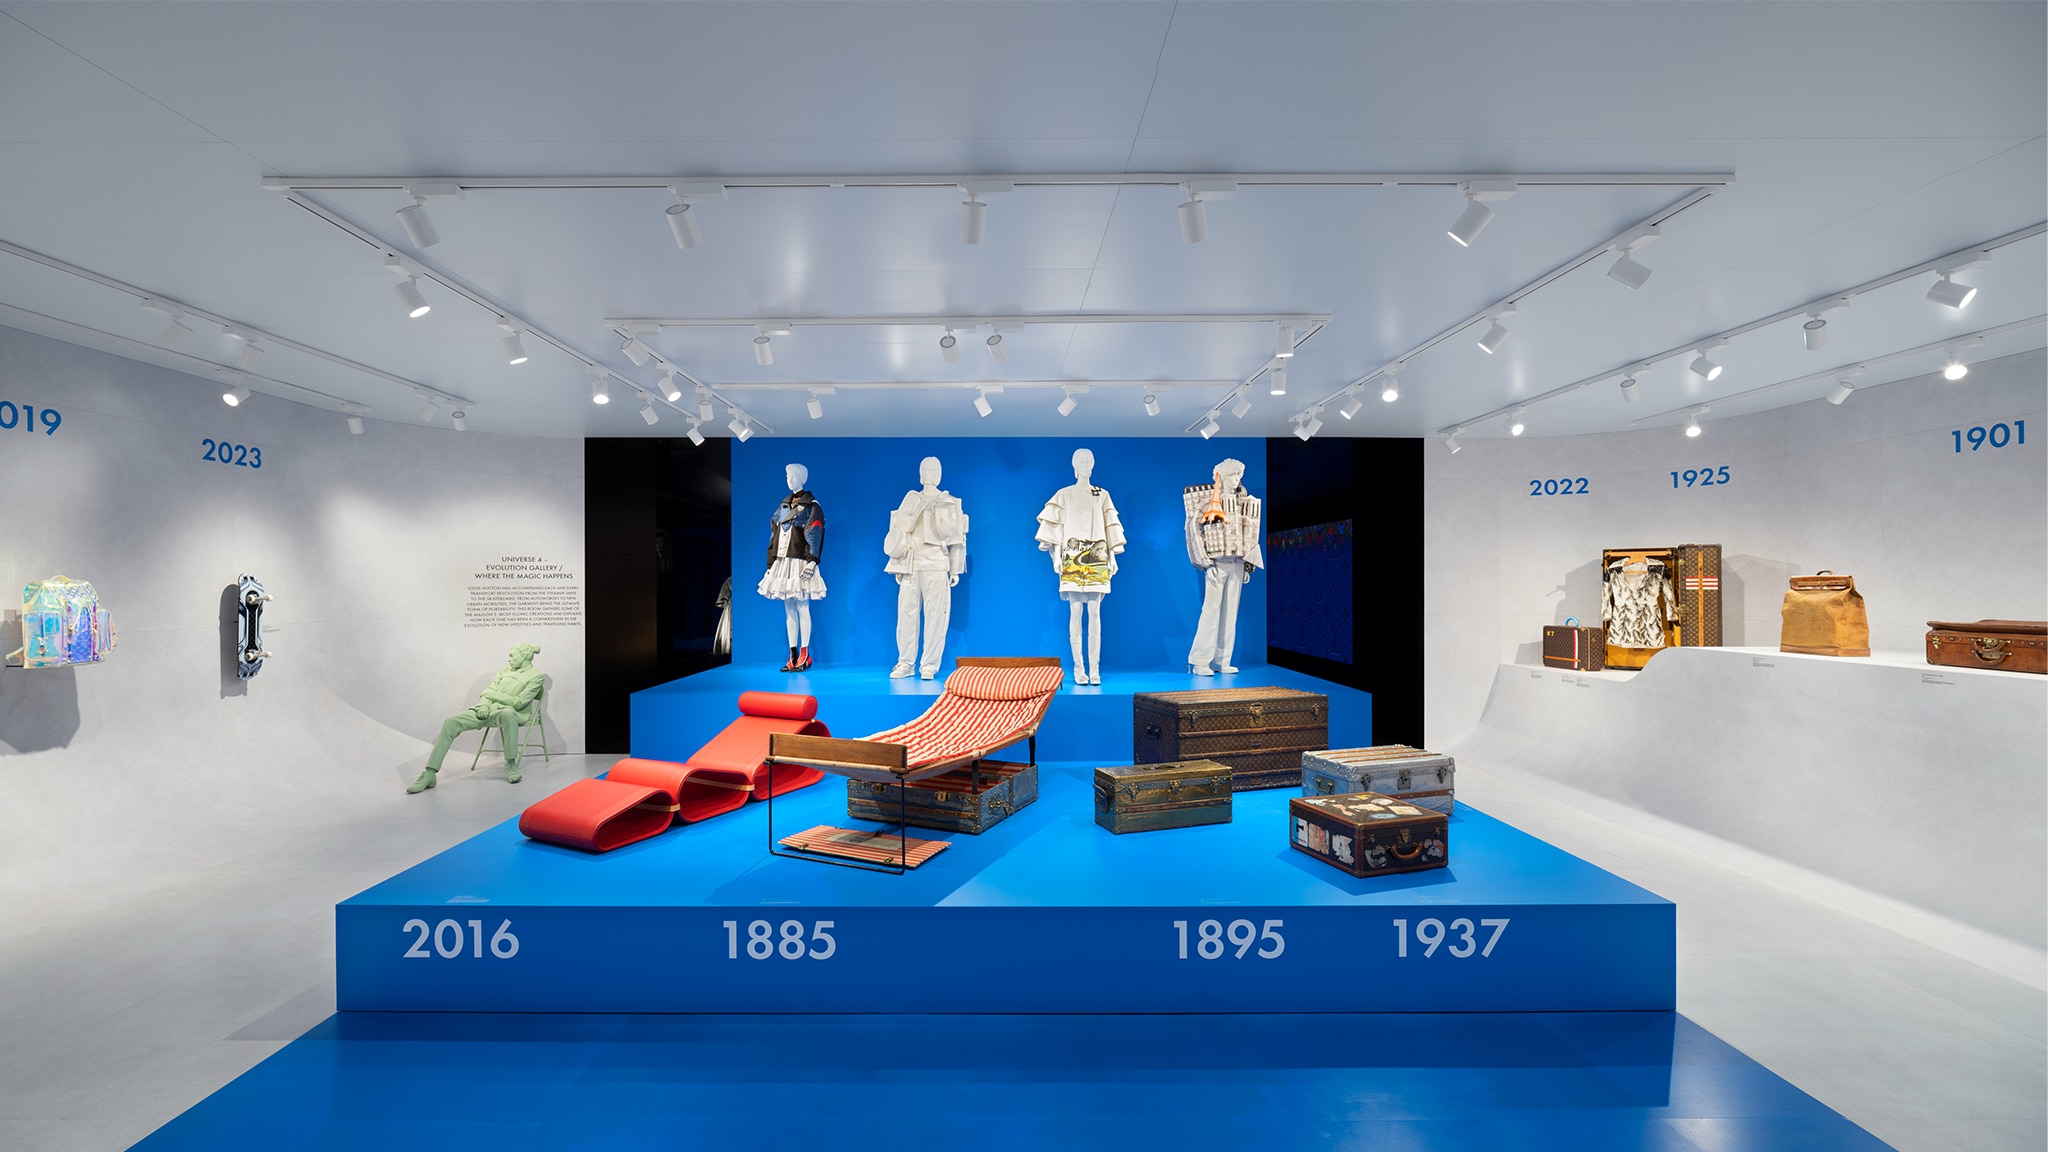 Louis Vuitton Puts Its Long History of Collaboration on Display in